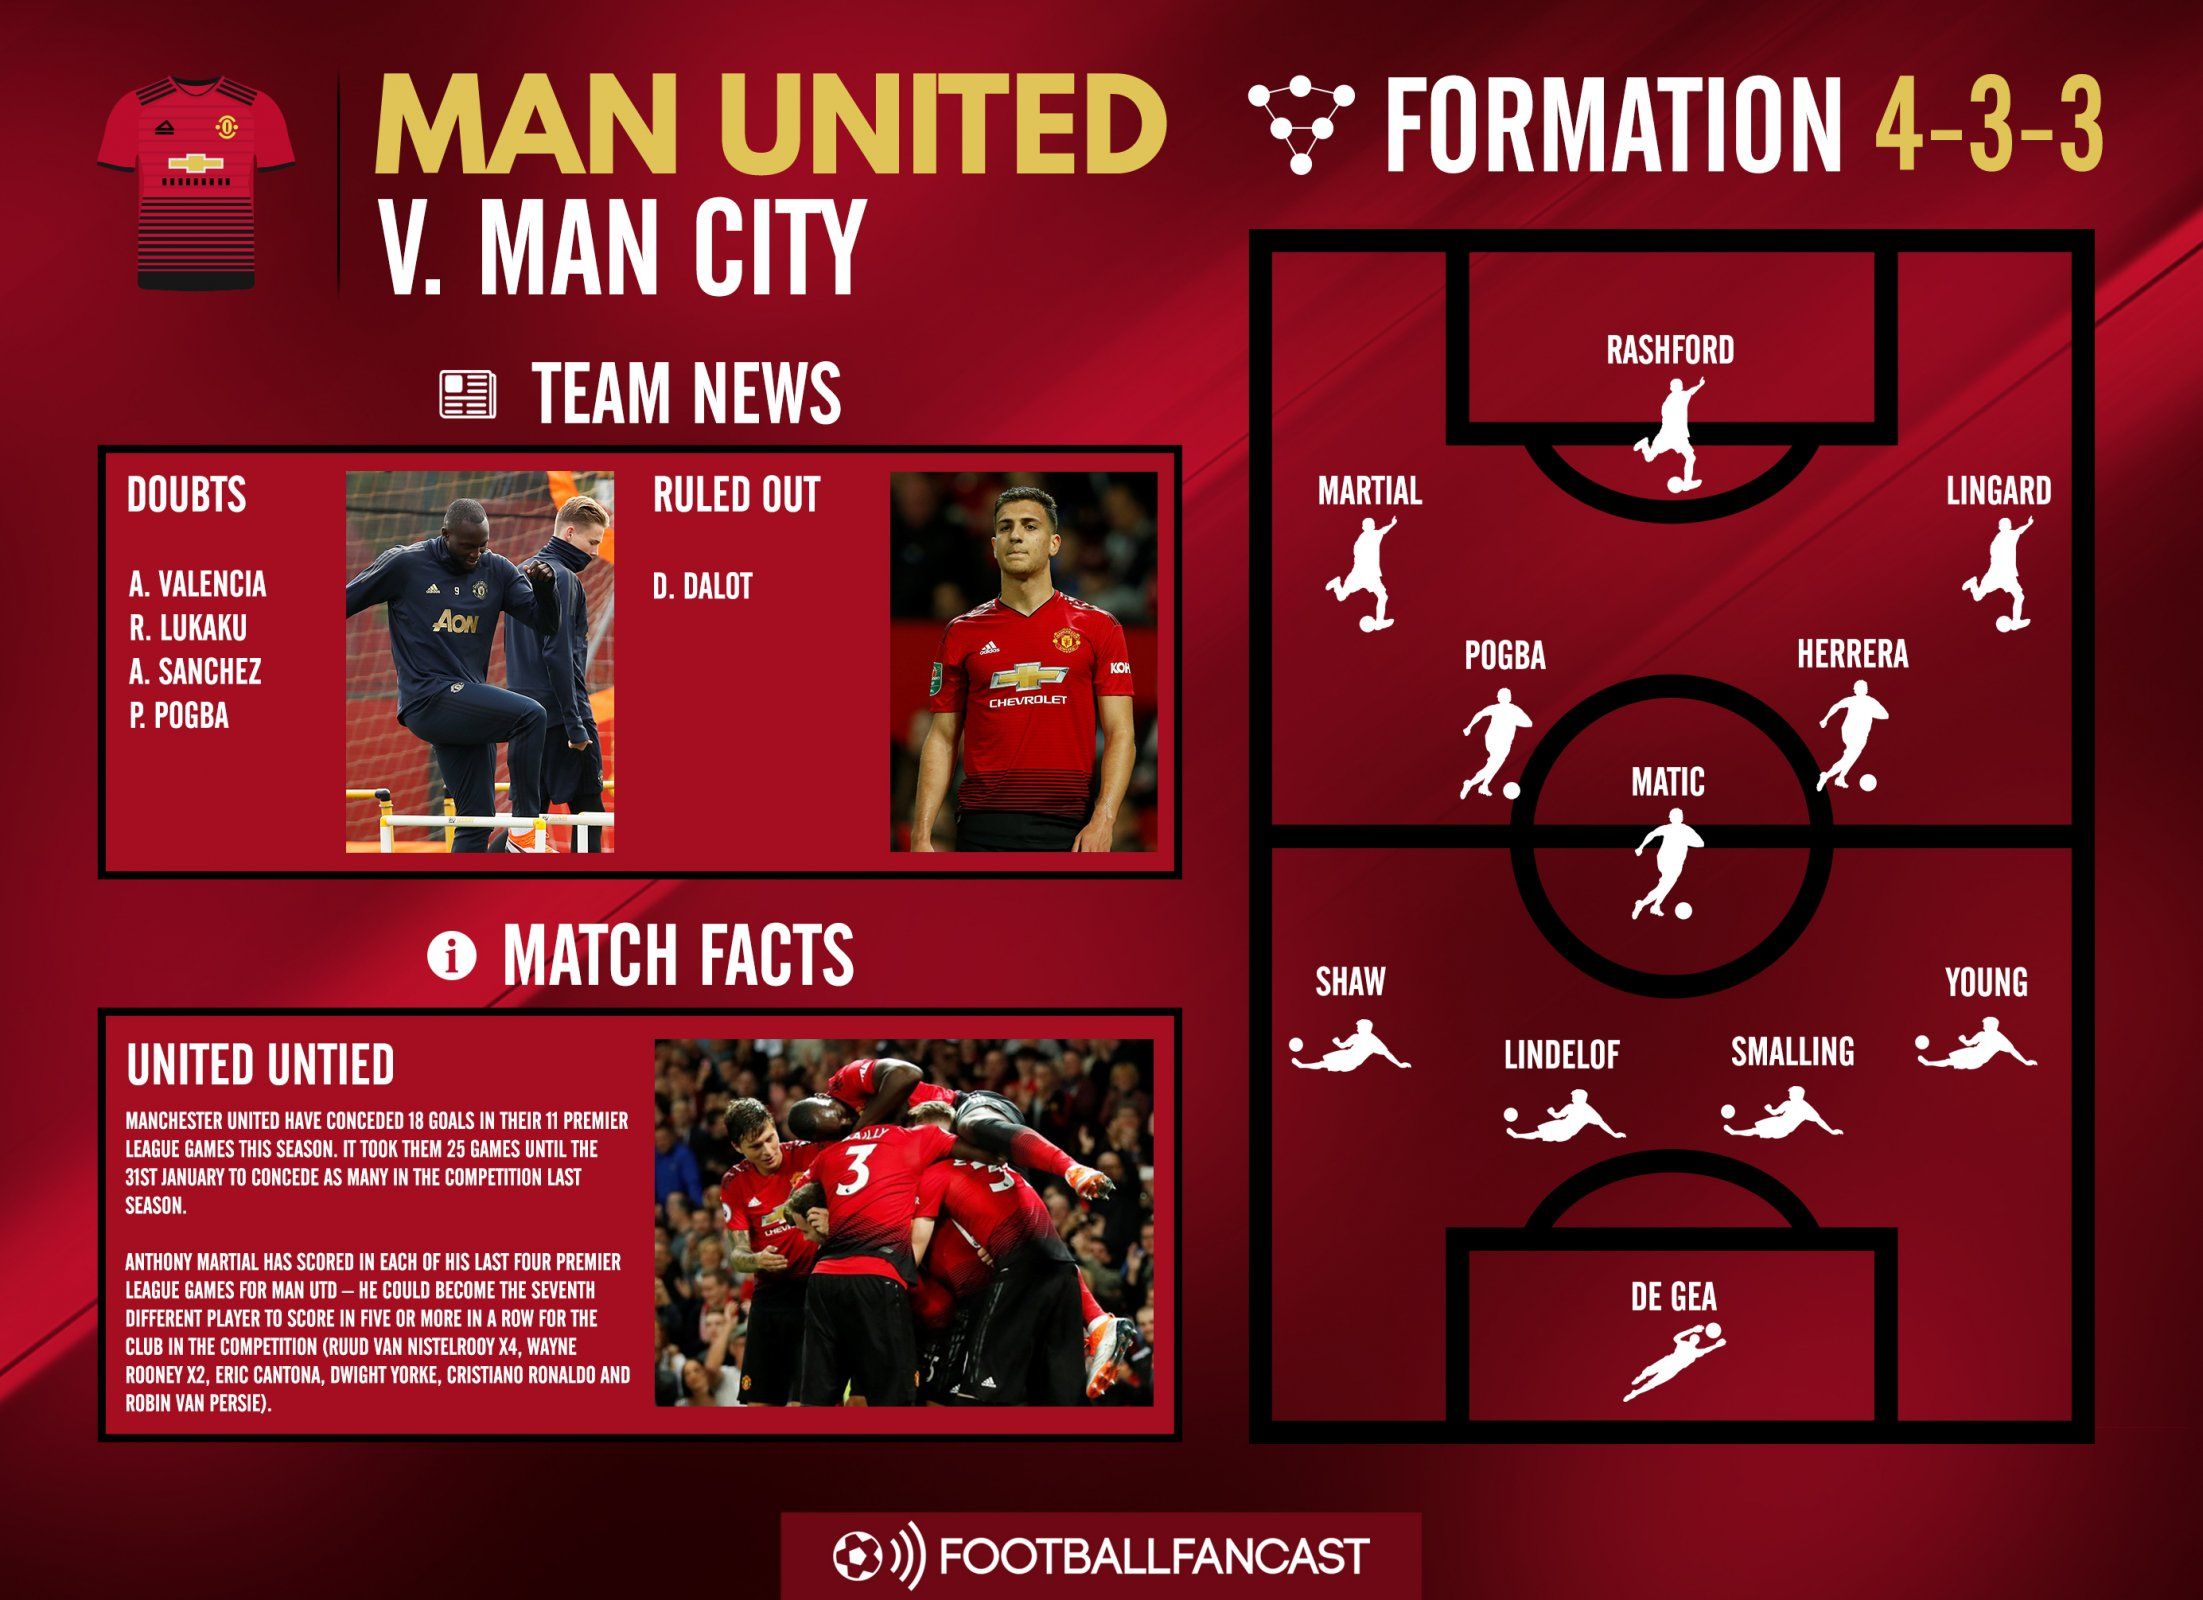 Manchester United team news for Manchester City clash